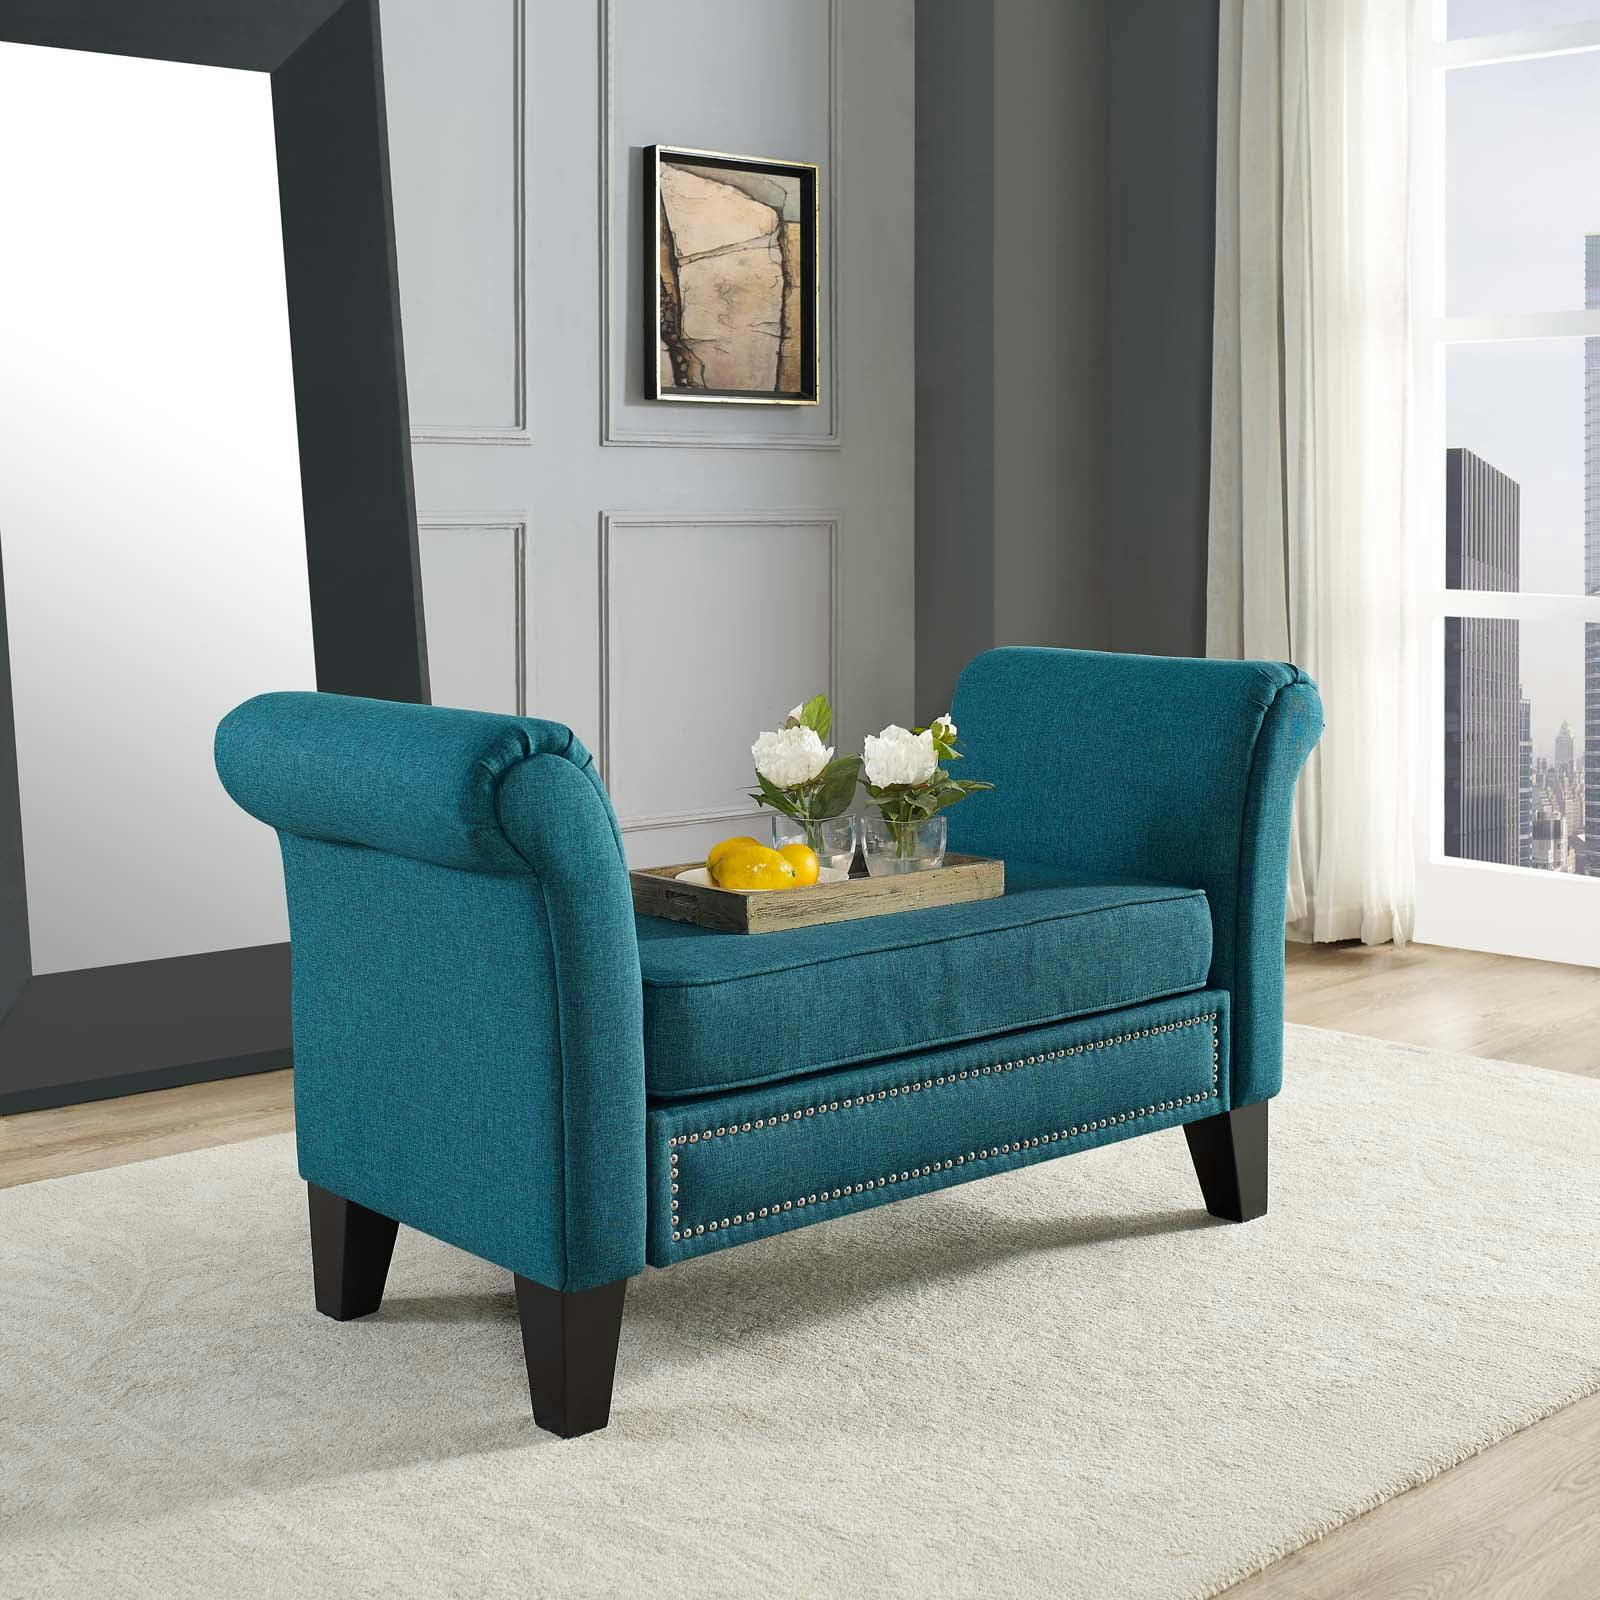 Rendezvous Teal Upholstered Bench with Rolled Arms and Nailhead Trim